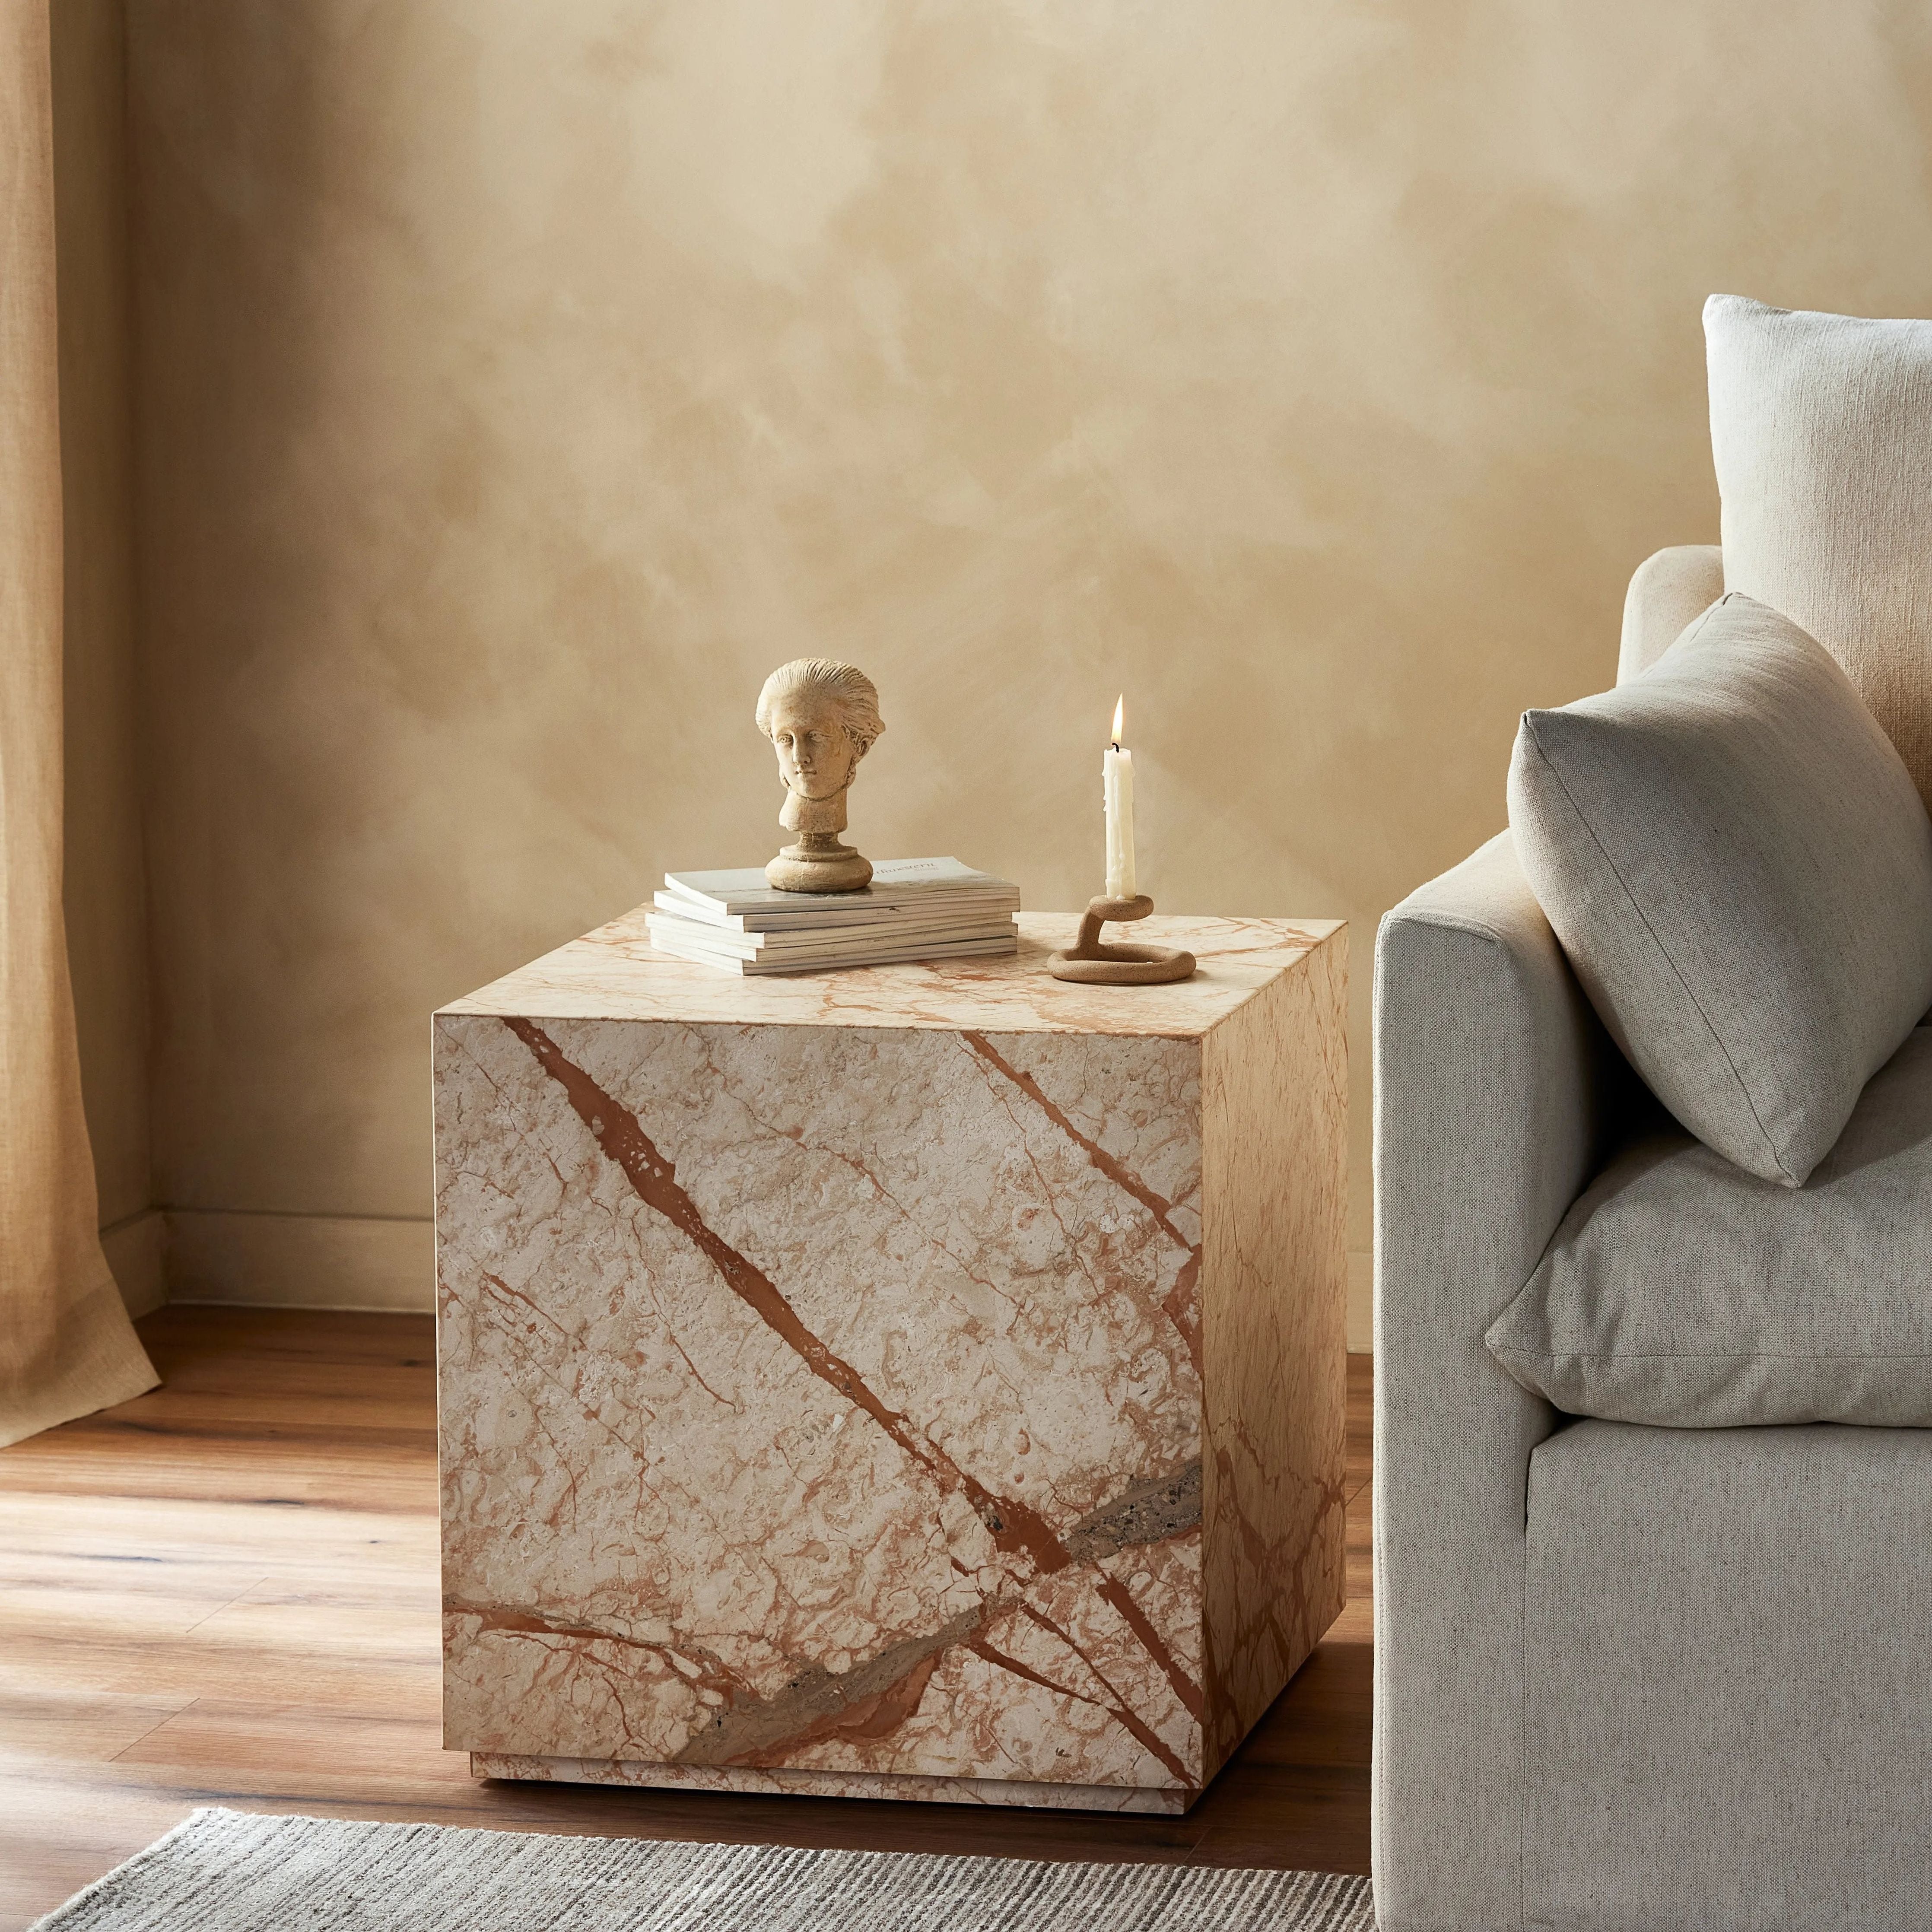 Taupe marble shapes a cubed, plinth-style end table that can be styled just about anywhere.Collection: Elemen Amethyst Home provides interior design, new home construction design consulting, vintage area rugs, and lighting in the Dallas metro area.